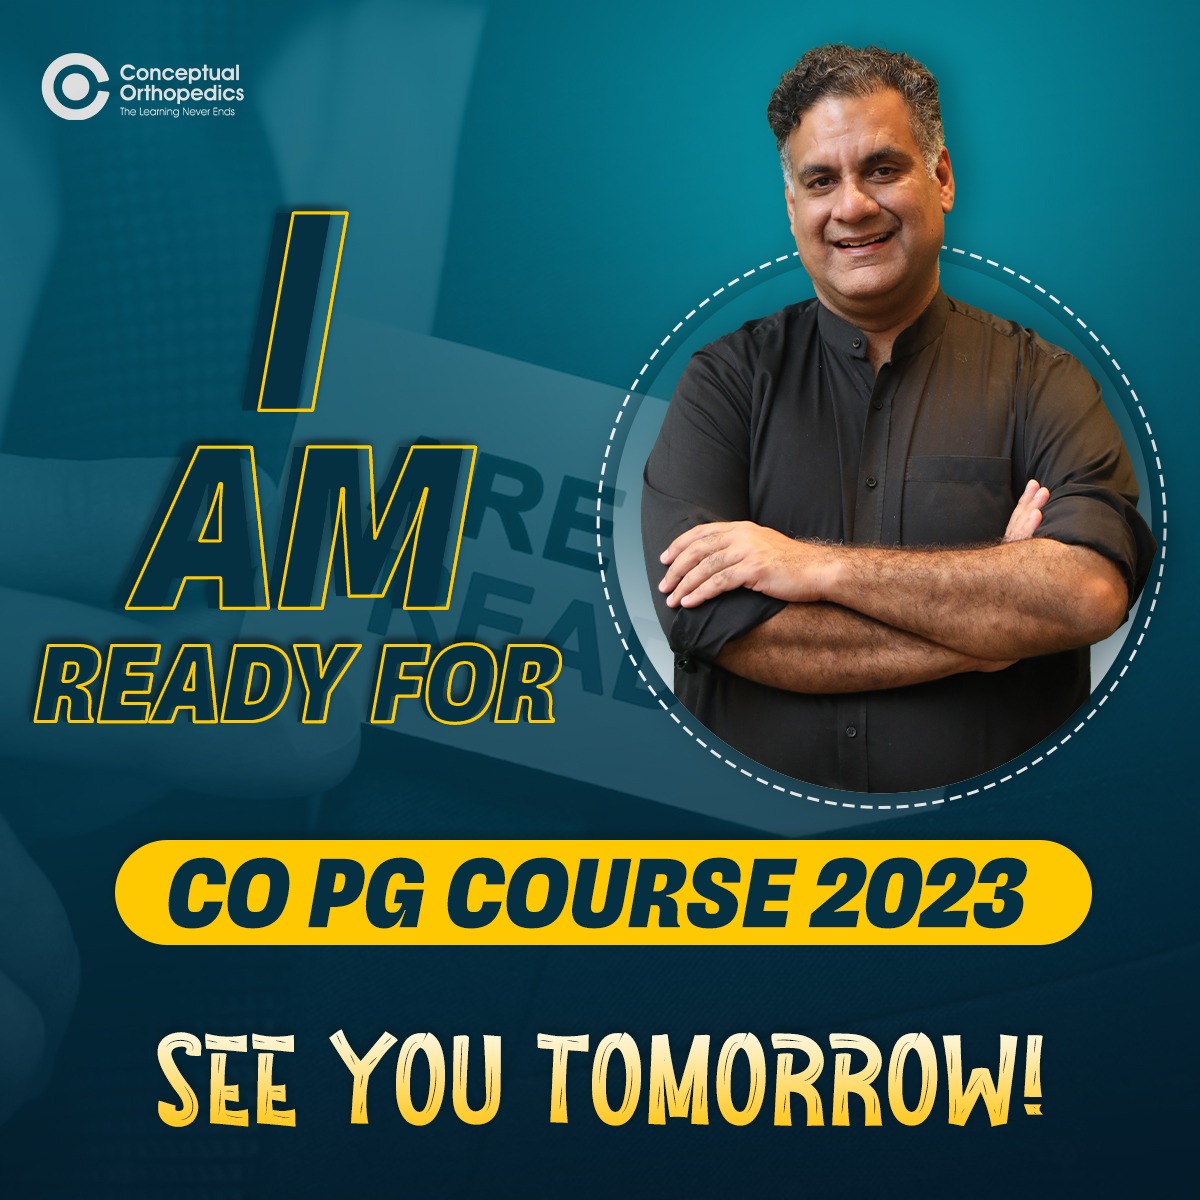 I always had a Dream to do something for my students and that is how Conceptual Orthopedics came into existence
Tomorrow marks an Important Day as we will start CO PG Course 2023.
I will be there for all my students who will be attending the course.
See You Tomorrow!

#copgcourse